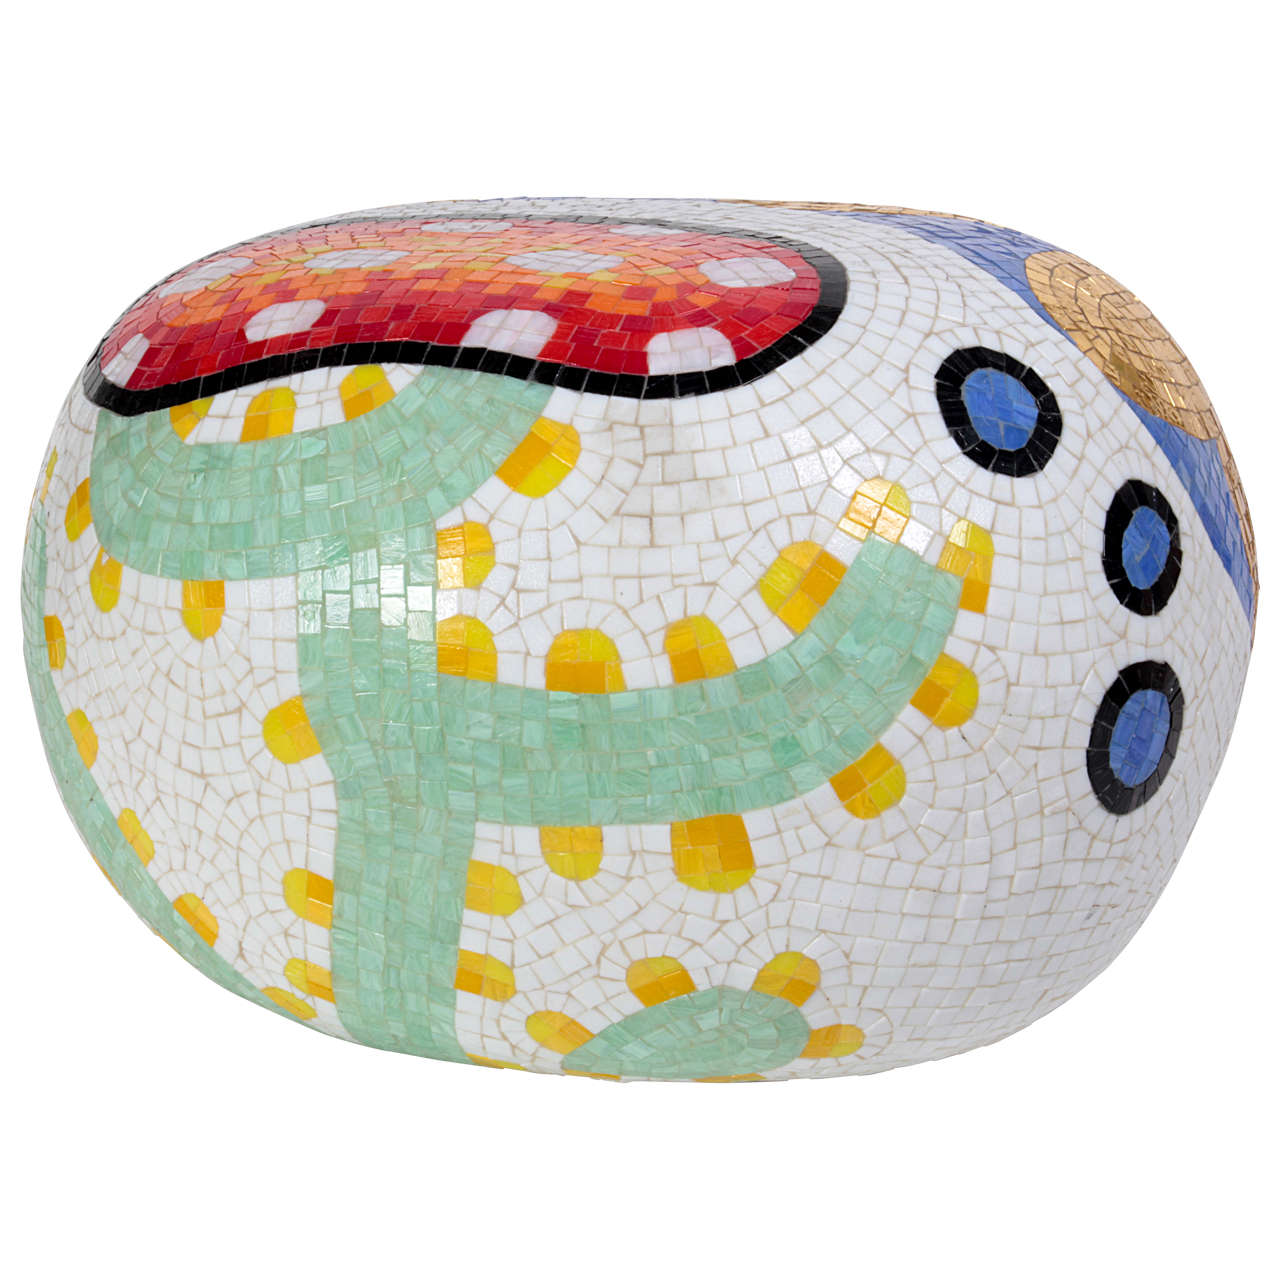 Marcel Wanders "One Morning They Woke Up" mosaic table/stool  2004 For Sale